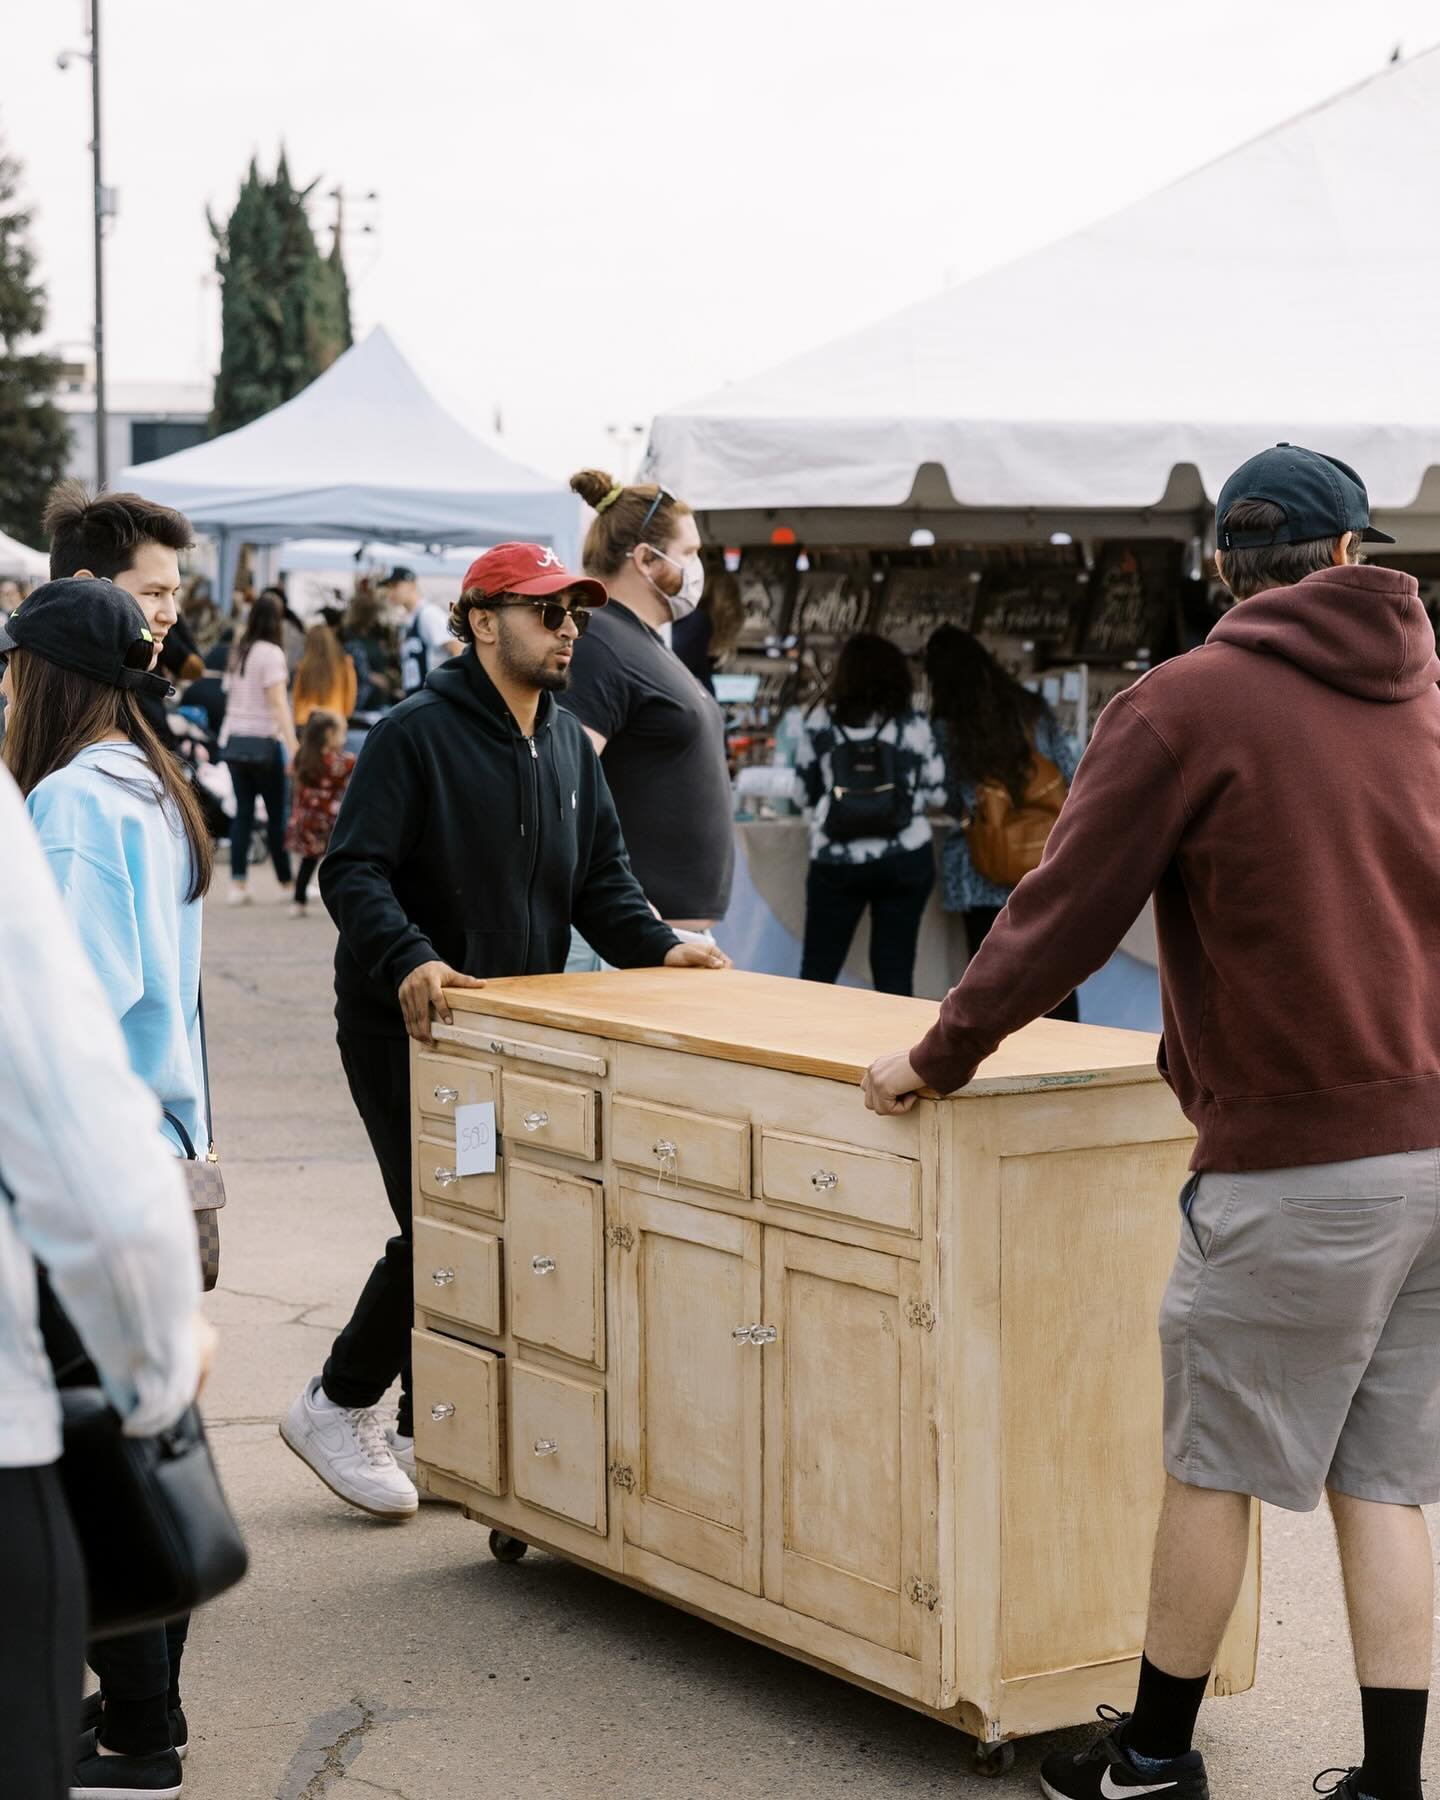 We&rsquo;ve got the Flea Market muscle! We have staff available to carry heavy items as well as a holding area for your convenience (for sold items). There is also a loading area for parking your vehicle to load furniture and other heavy items. So ge